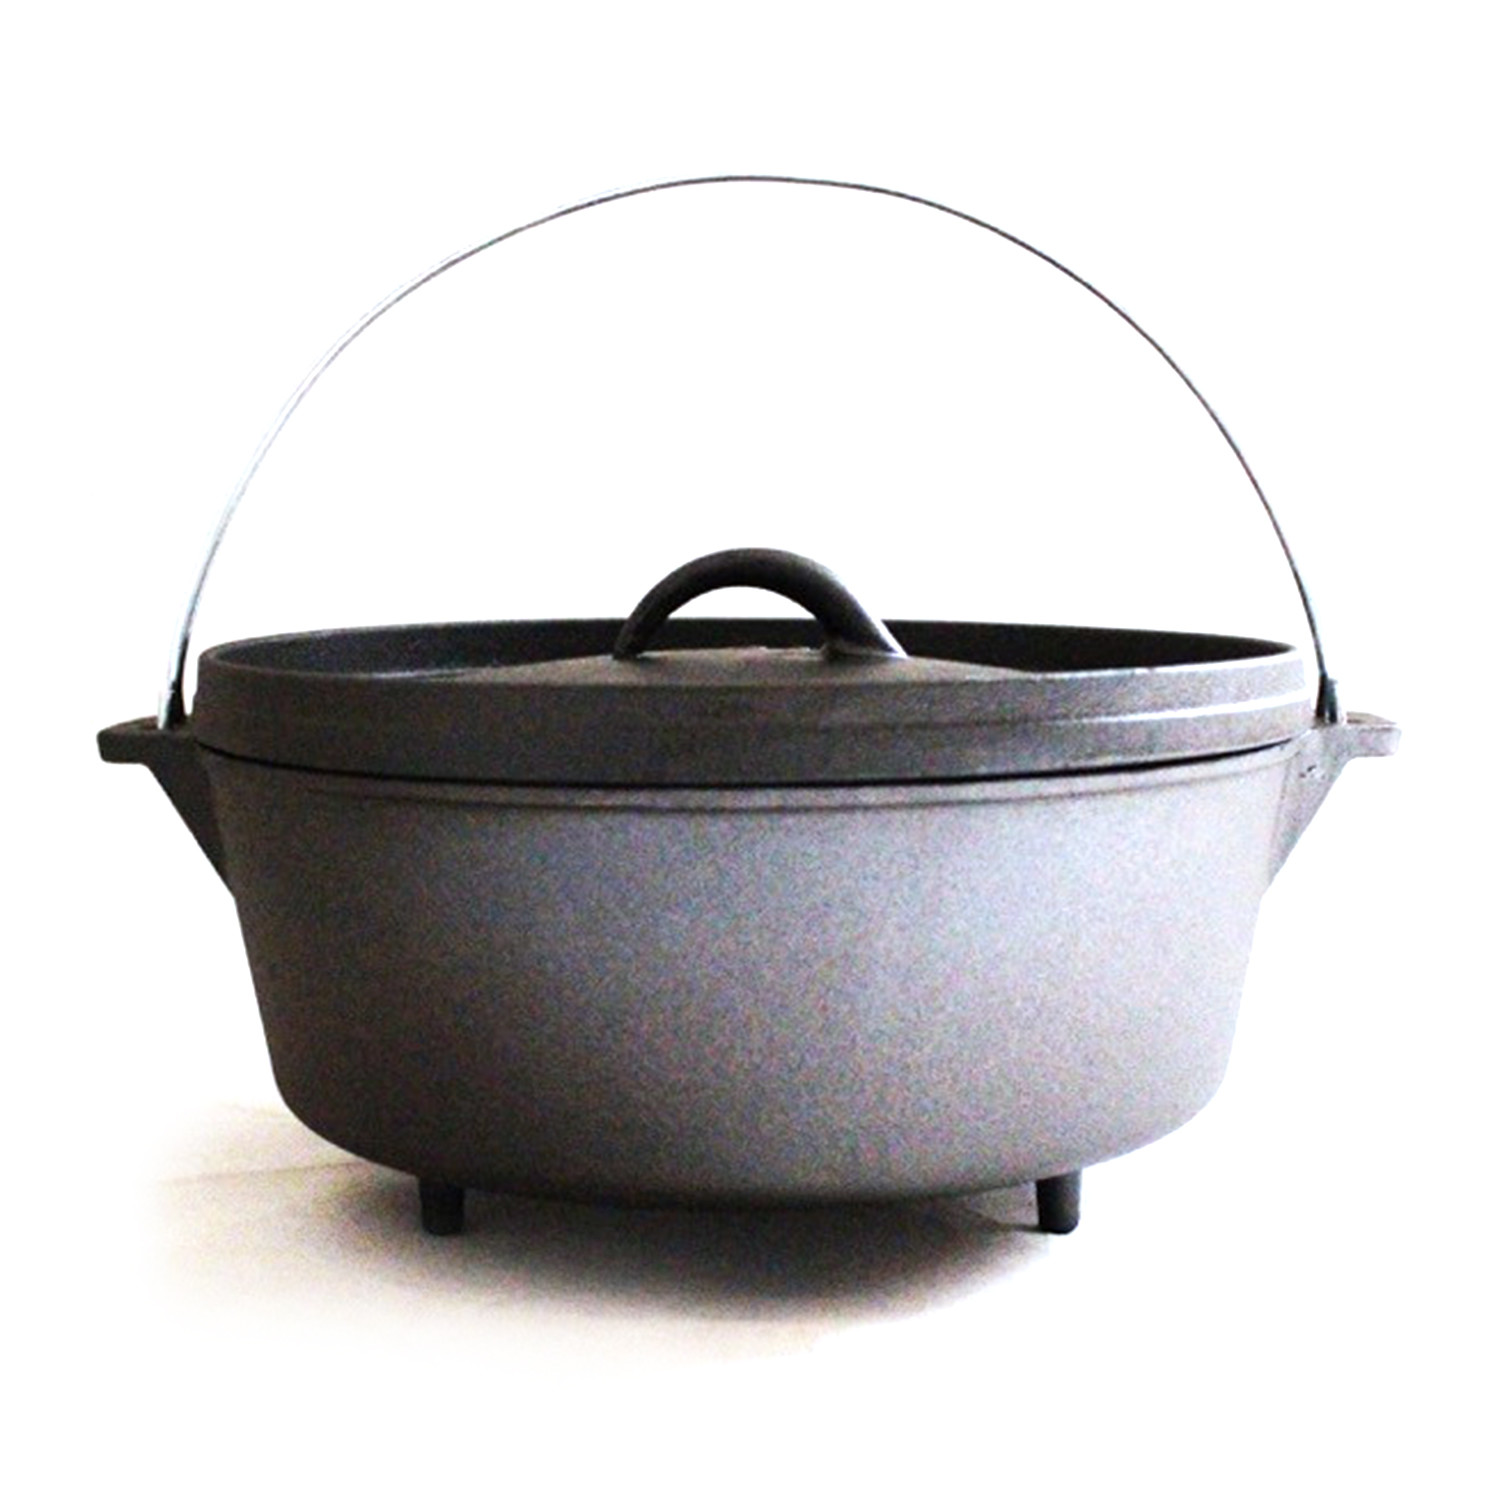 CampMaid campmaid dutch oven kickstand & lid lifter - durable